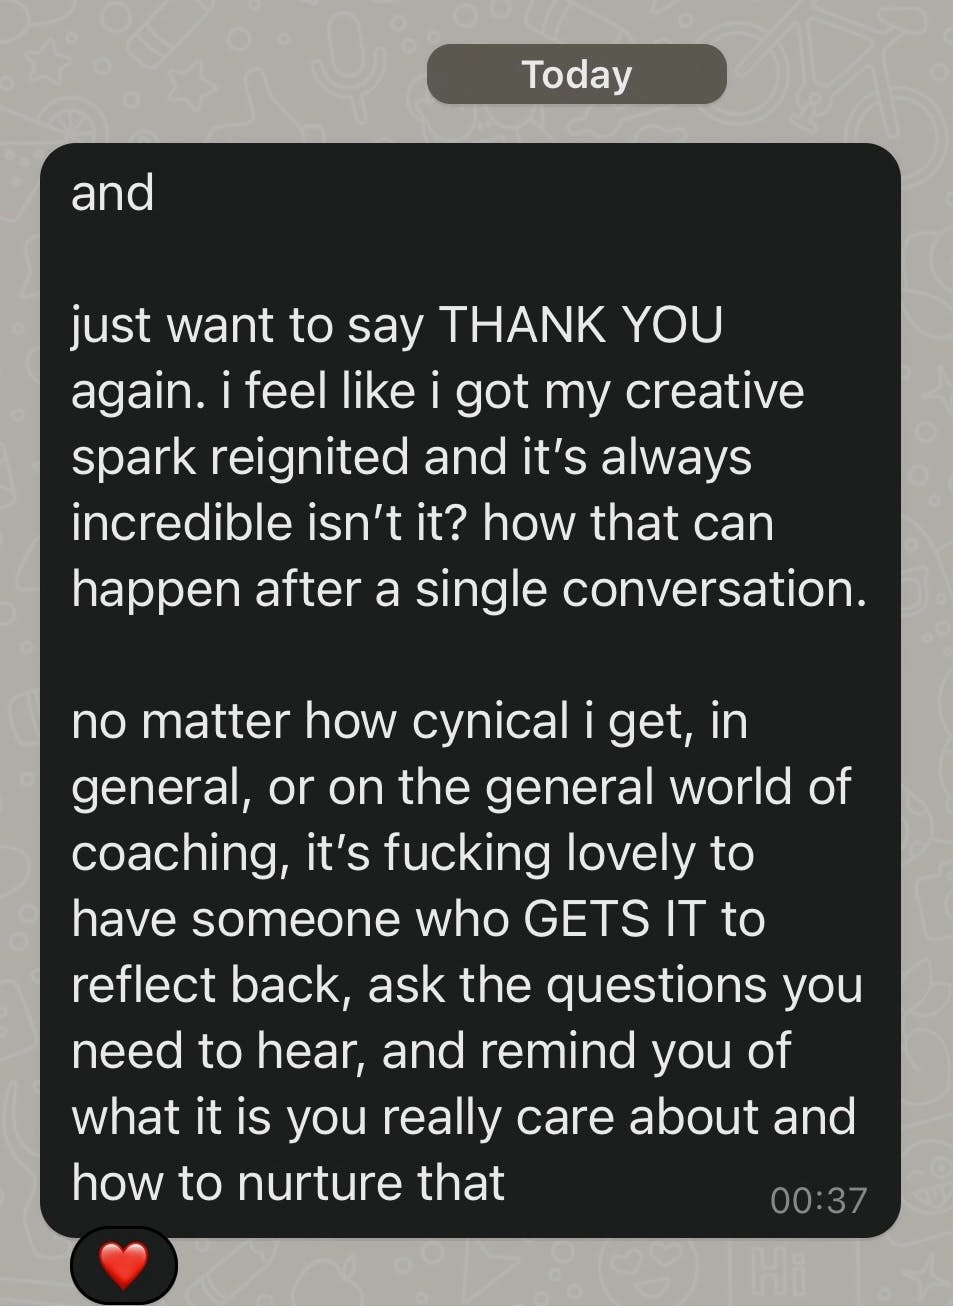 Screenshot of WhatsApp message that reads: “just want to say THANK YOU again. i feel like i got my creative spark reignited and it’s always incredible isn’t it? how that can happen after a single conversation.  no matter how cynical i get, in general, or on the general world of coaching, it’s fucking lovely to have someone who GETS IT to reflect back, ask the questions you need to hear, and remind you of what it is you really care about and how to nurture that”